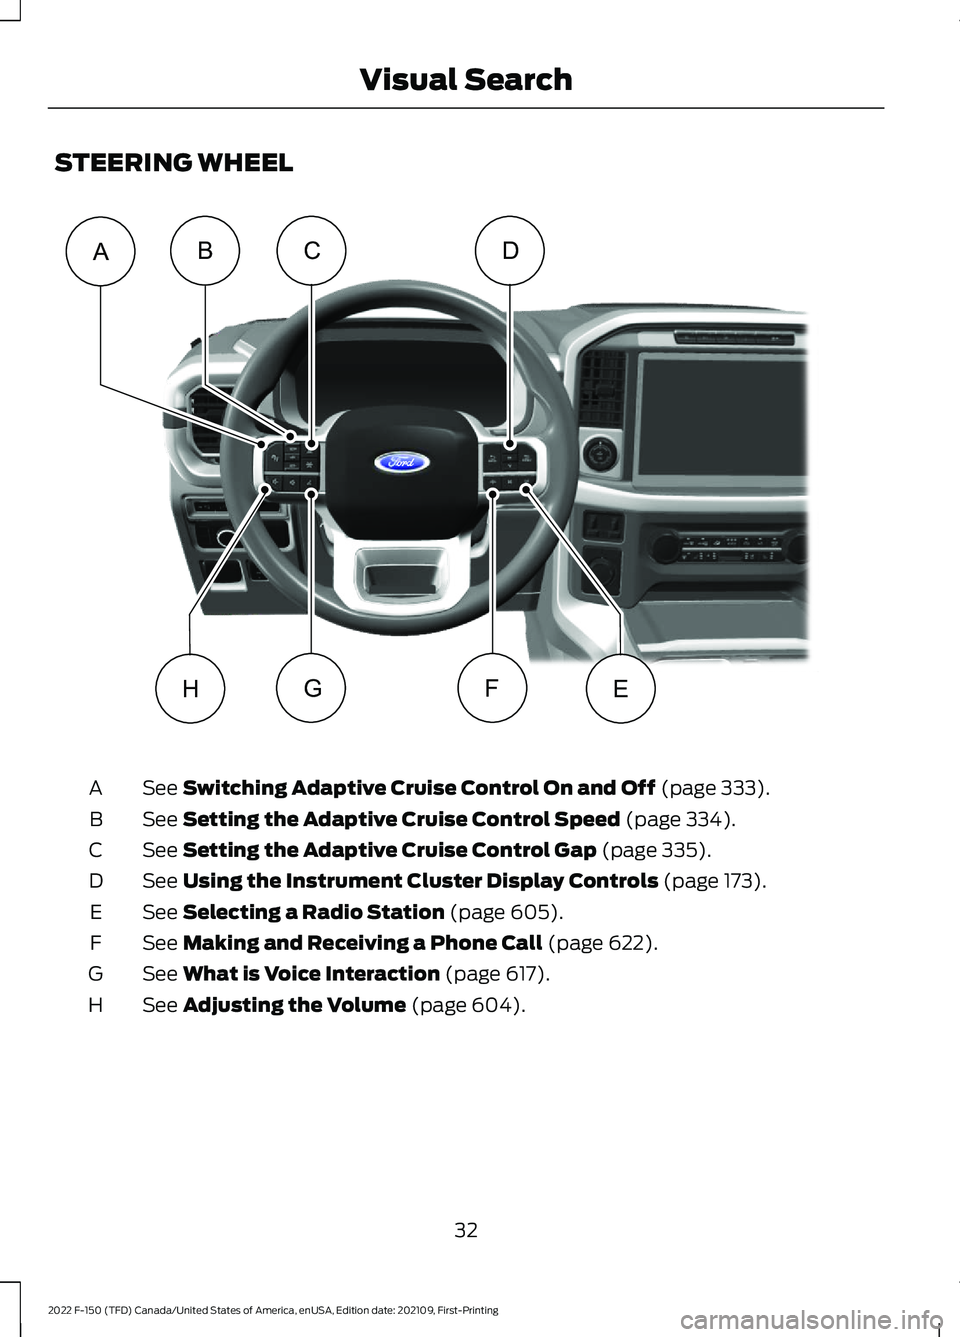 FORD F-150 2022 Owners Guide STEERING WHEEL
See Switching Adaptive Cruise Control On and Off (page 333).
A
See 
Setting the Adaptive Cruise Control Speed (page 334).
B
See 
Setting the Adaptive Cruise Control Gap (page 335).
C
Se